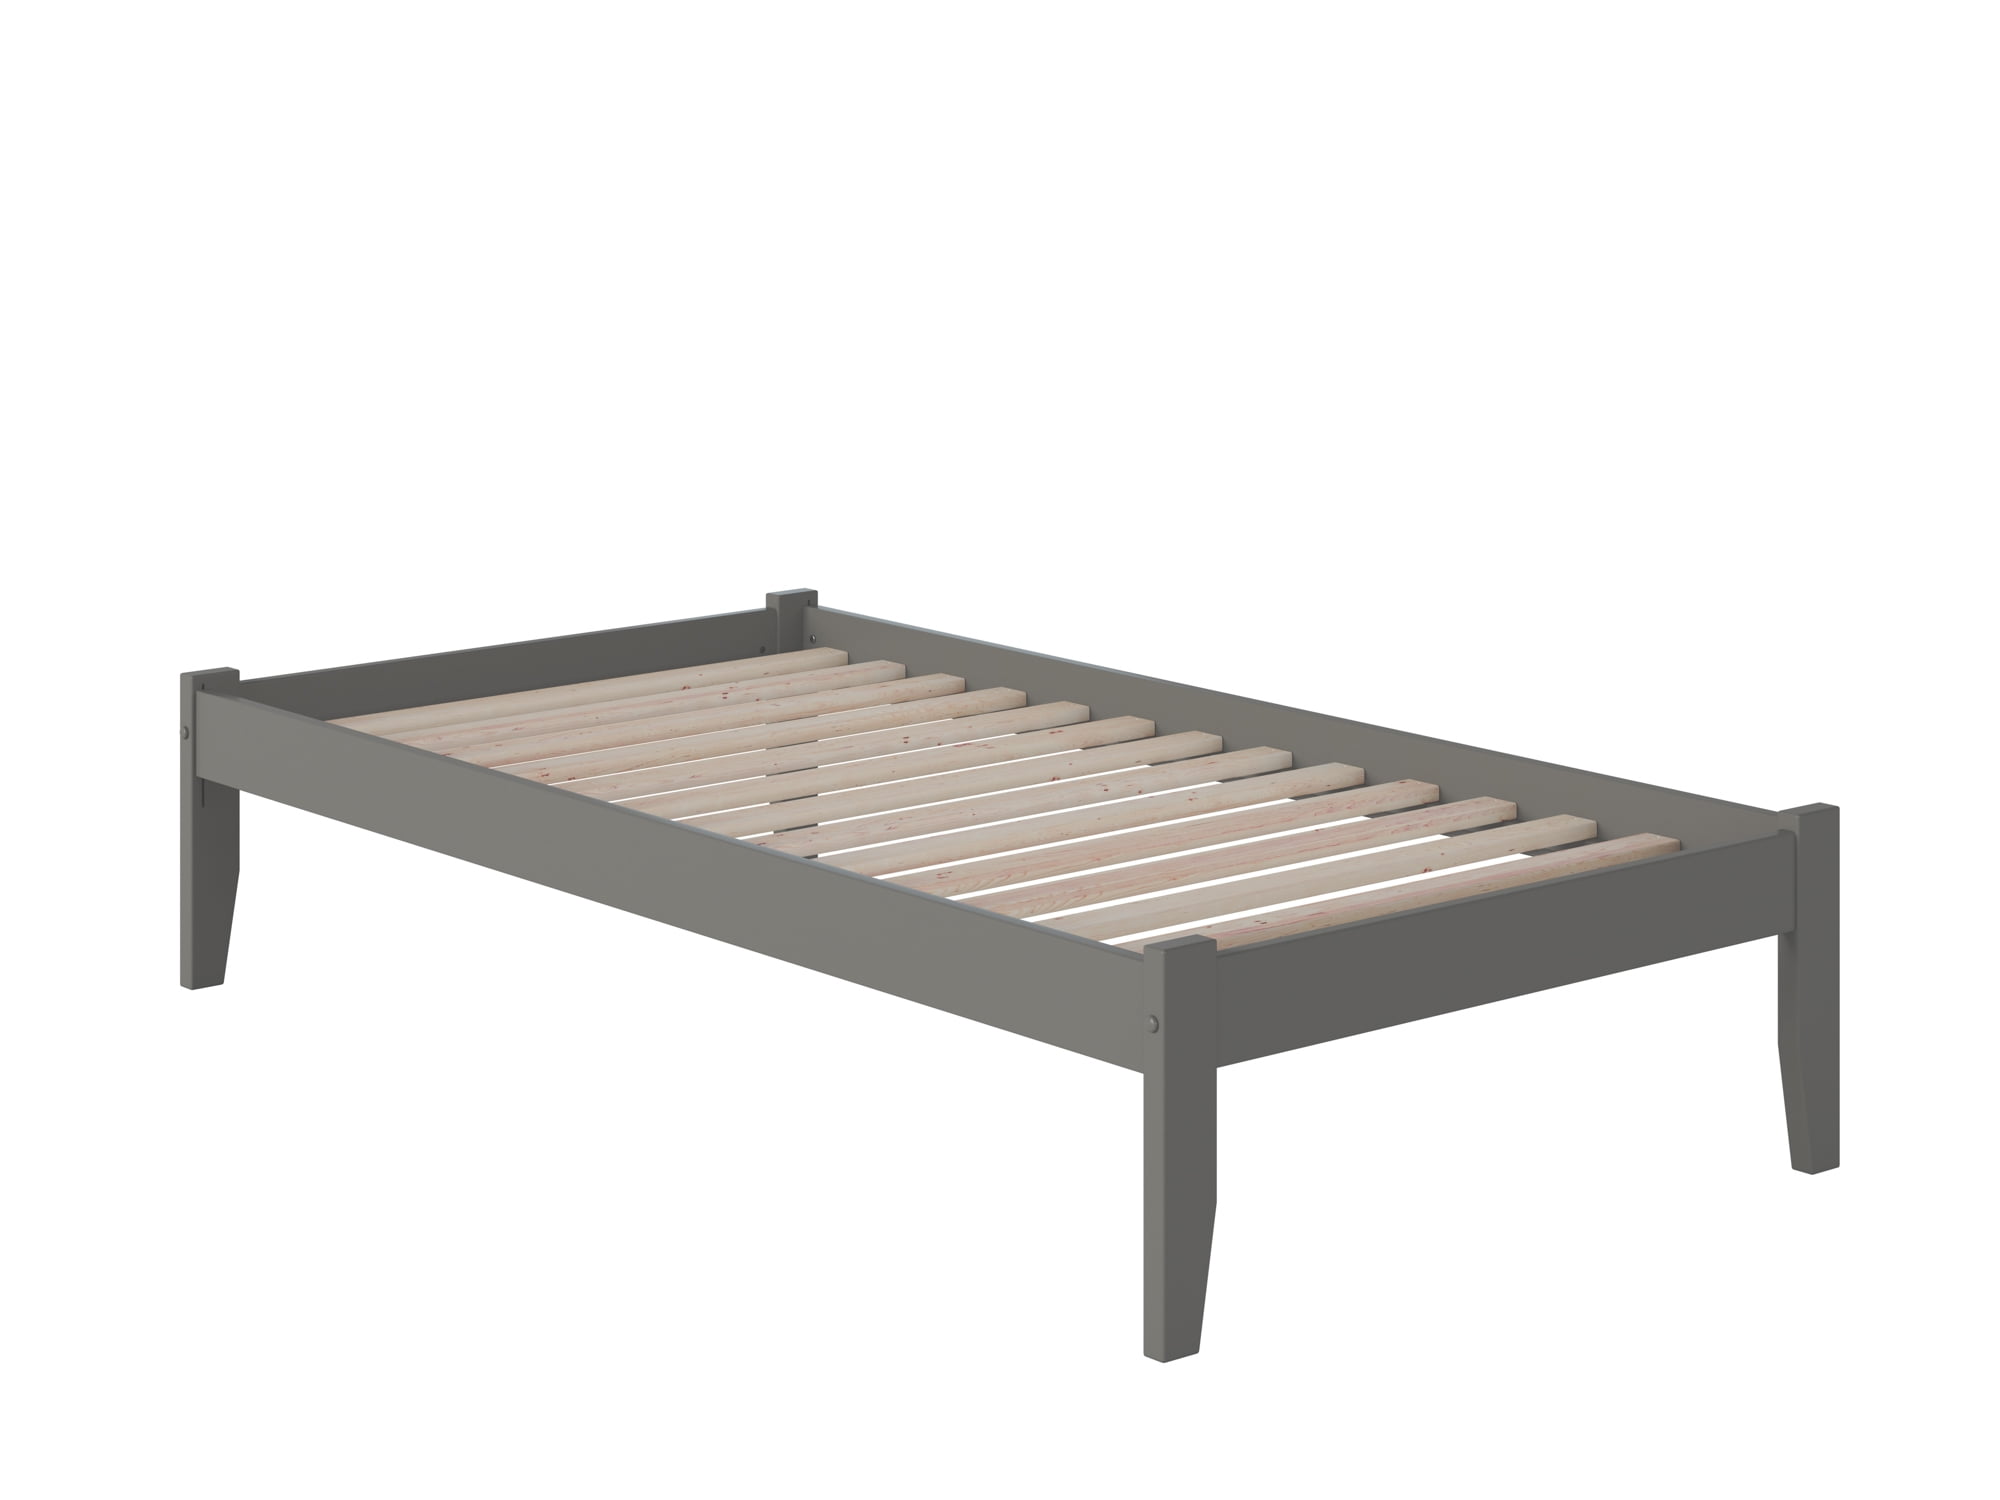 Ar8011009 Concord Twin Xl Platform Bed With Open Foot Board - Grey